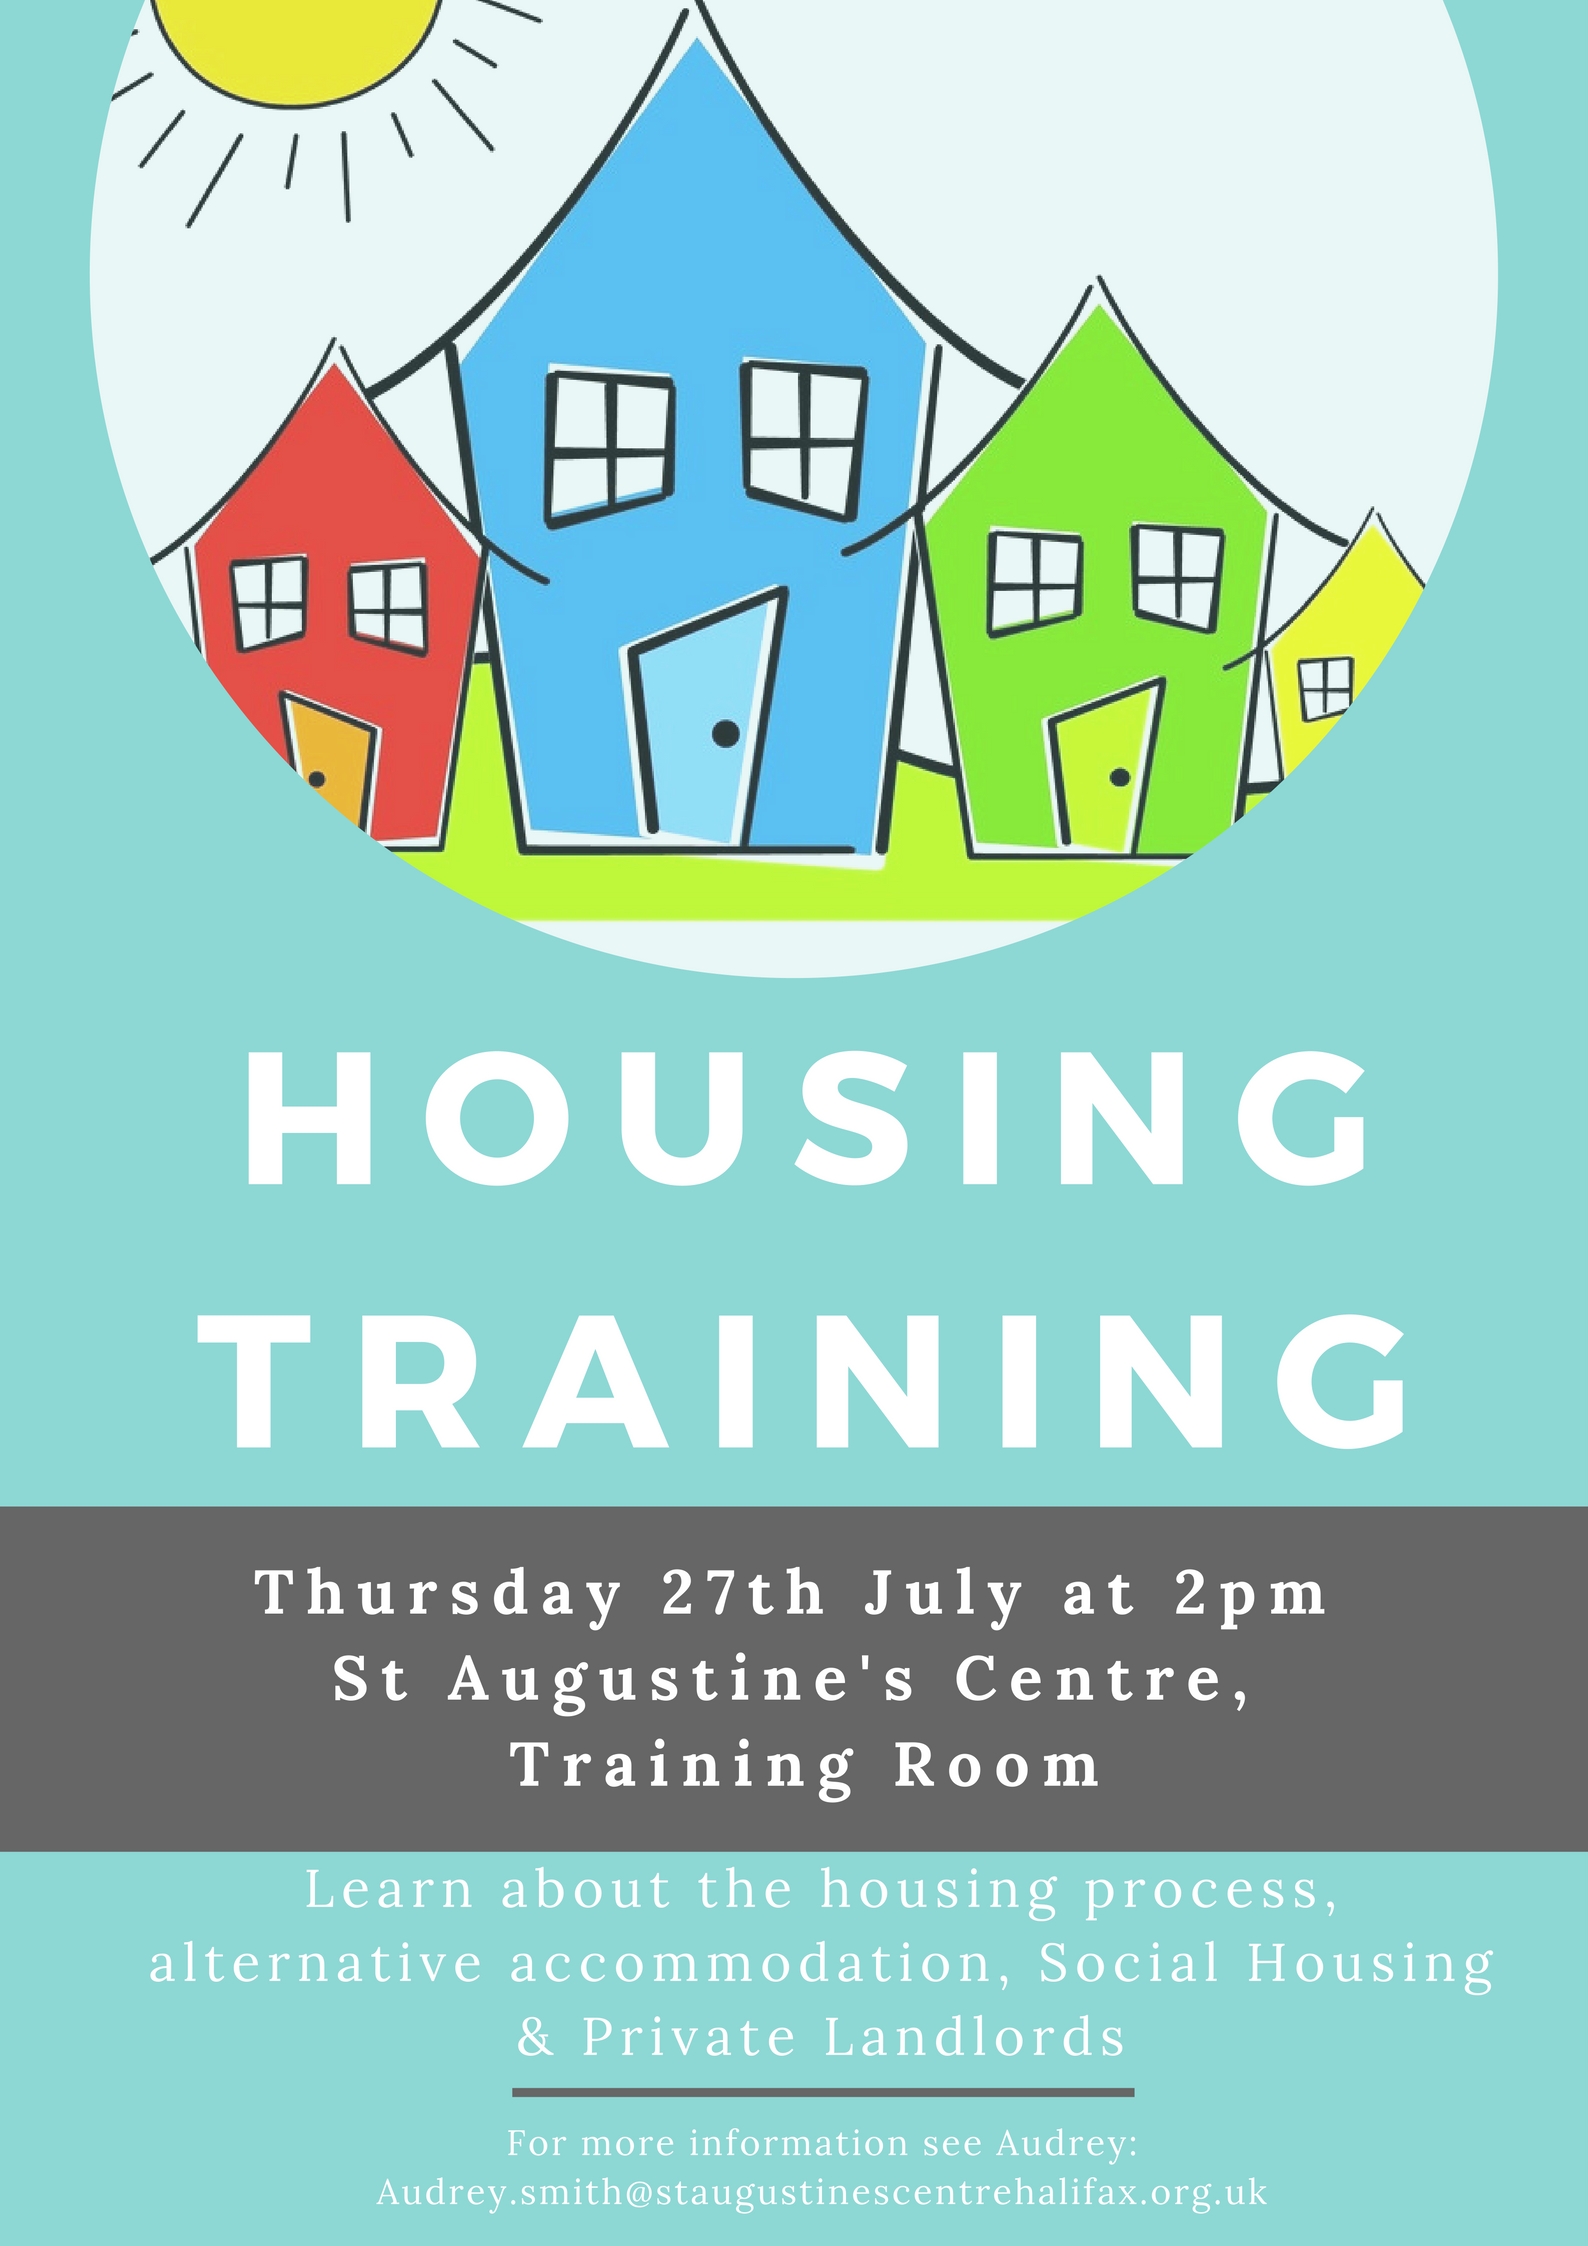 Housing Training Thursday 27th July 2pm St. Augustine's Centre